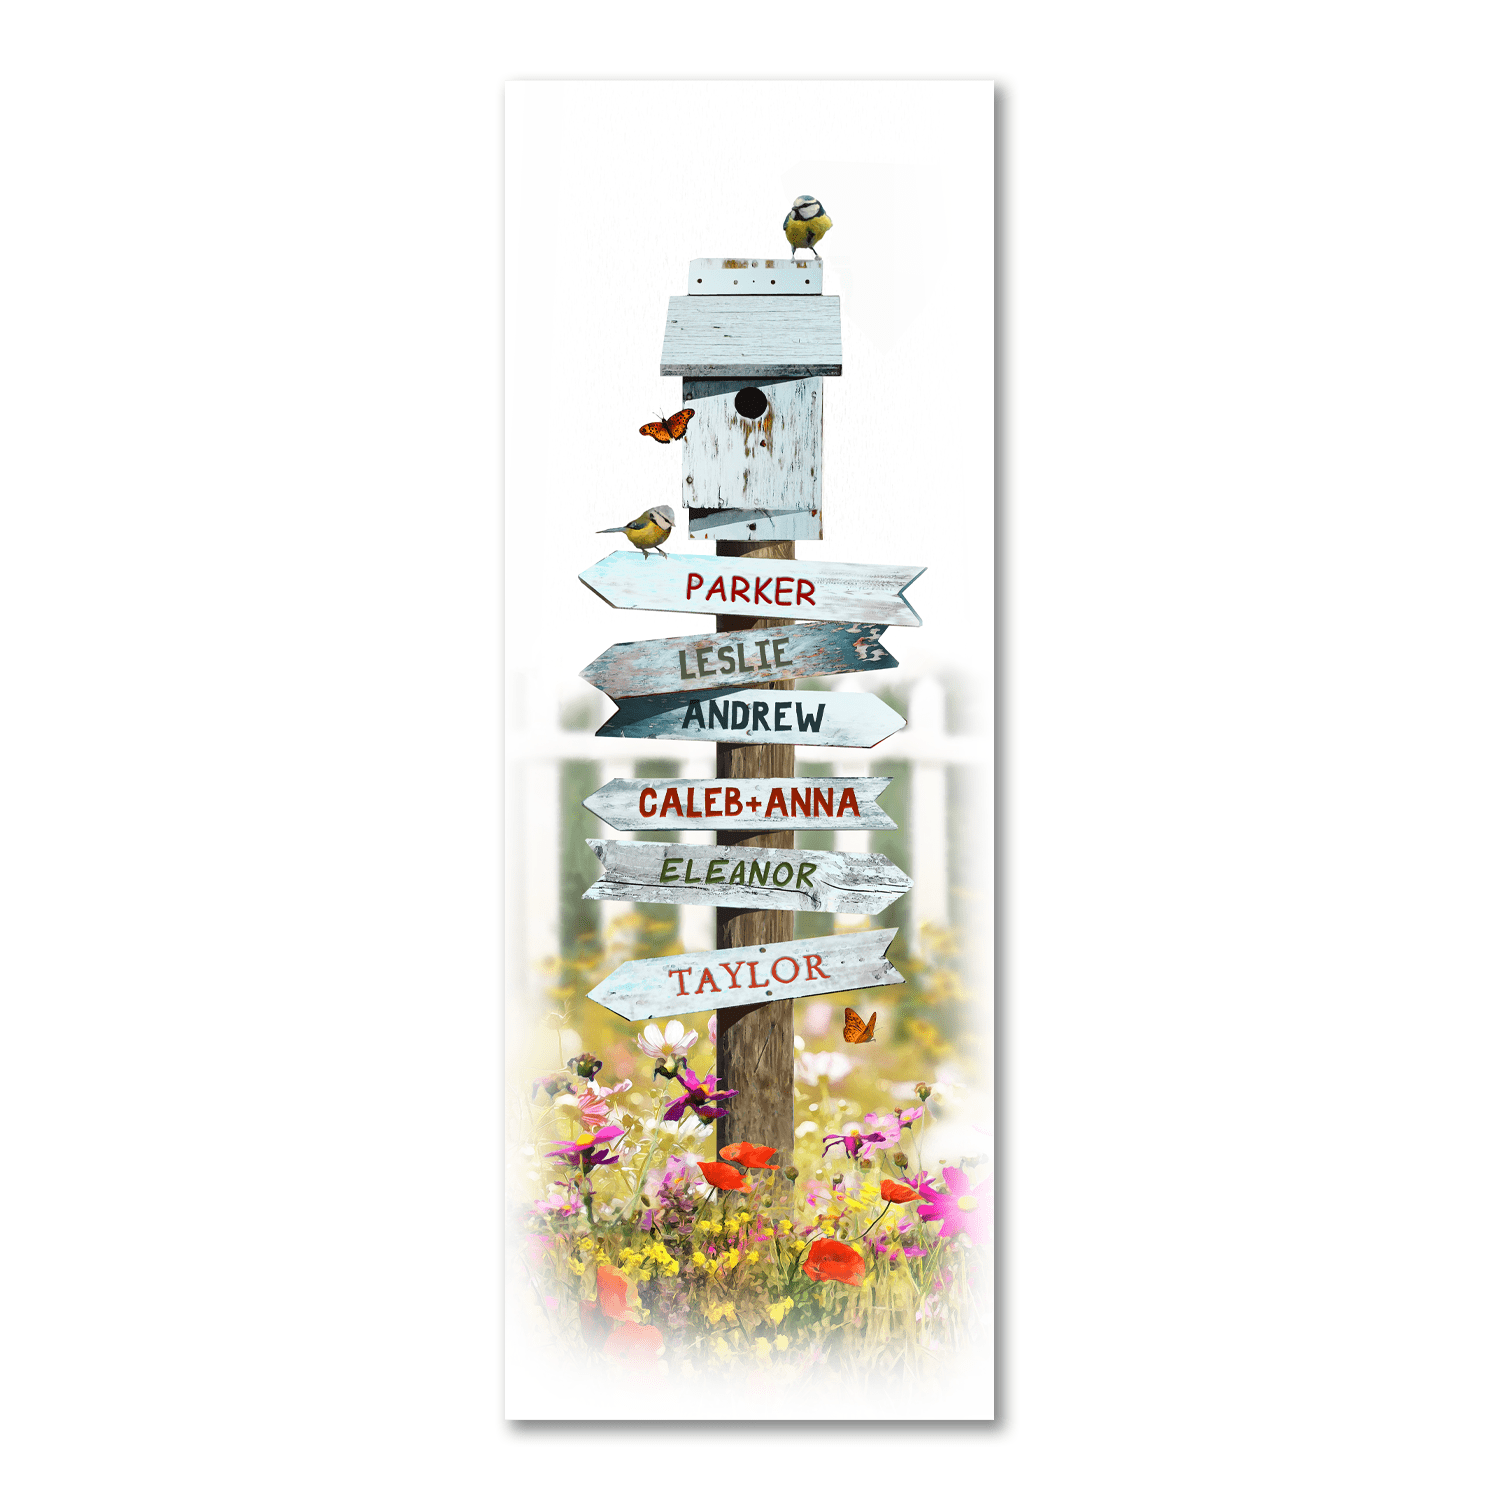 Personalized Sign Post on a Country Road - Personalized art gift from Personal Prints